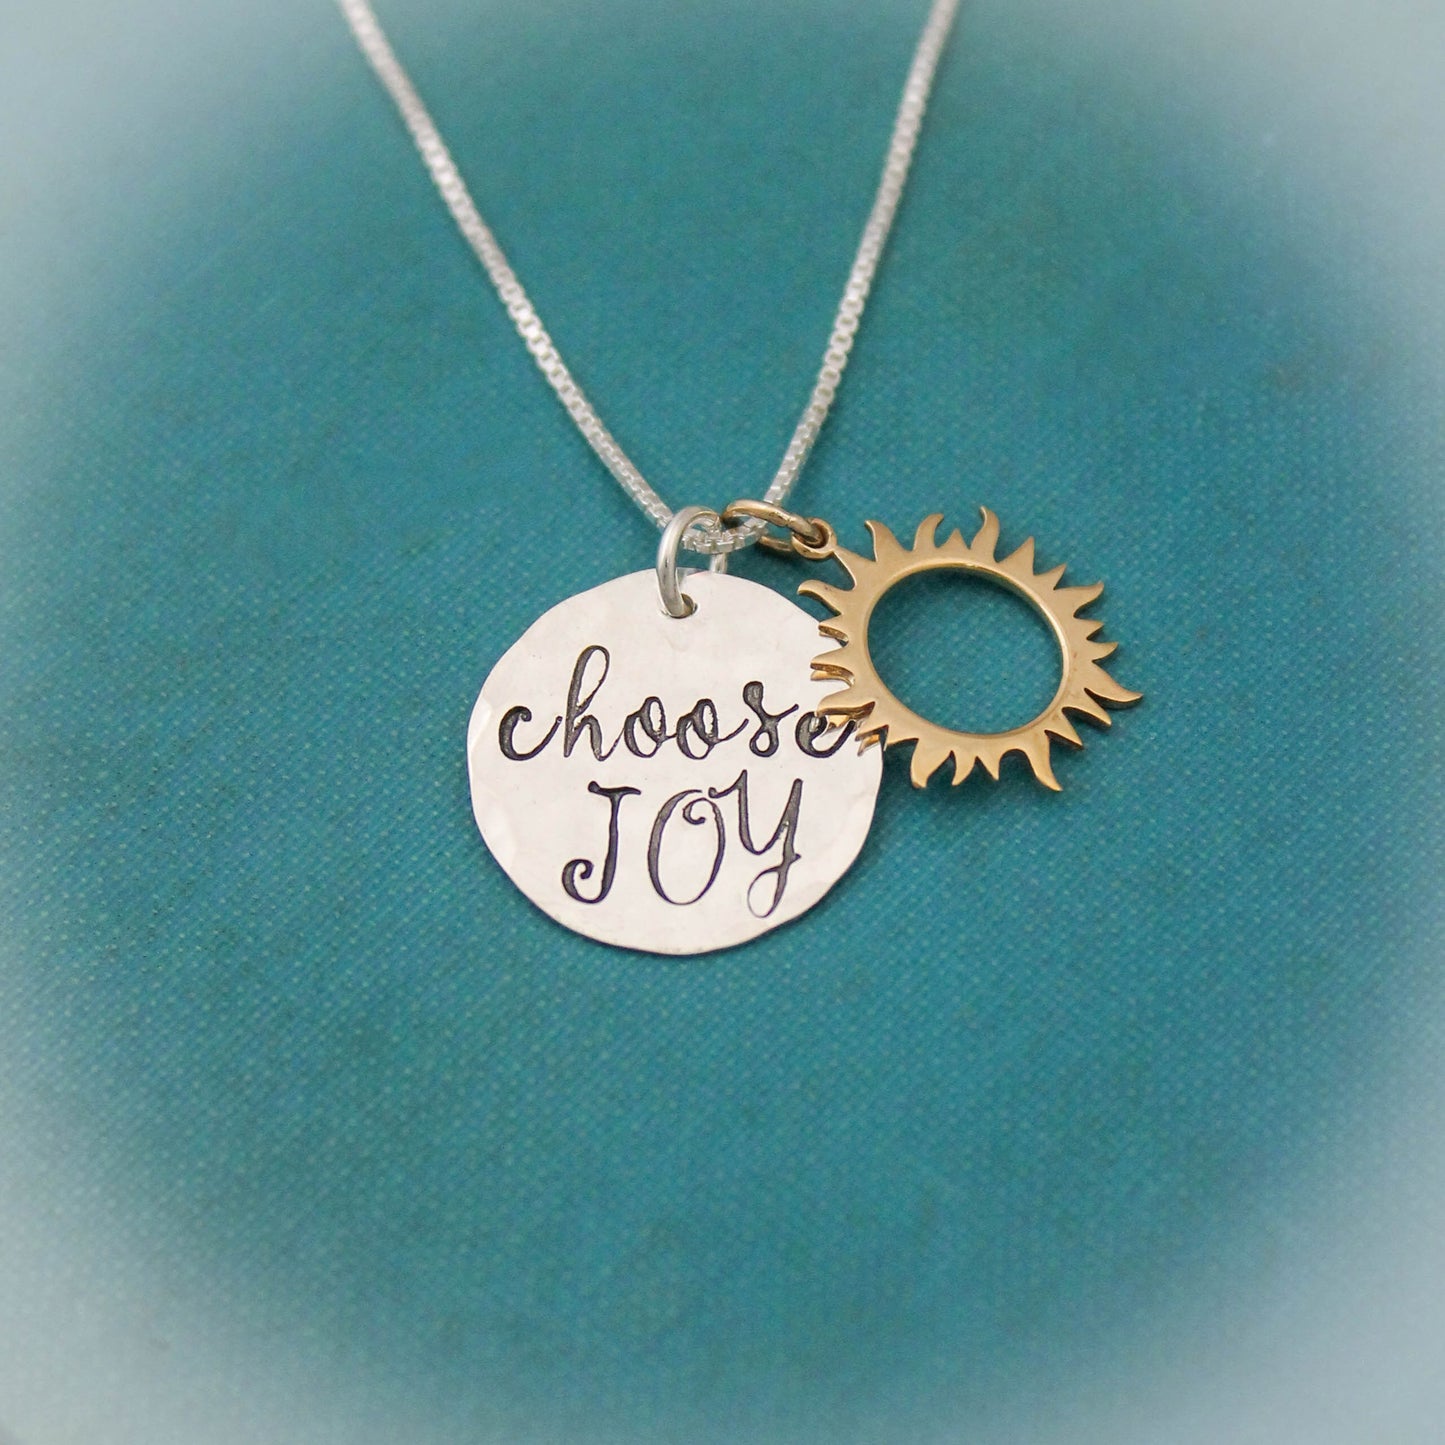 Choose JOY Necklace, Sun Jewelry, Choose JOY Jewelry, Mother Necklace, Gifts for Her, Personalized Hand Stamped Jewelry, Positive Jewelry